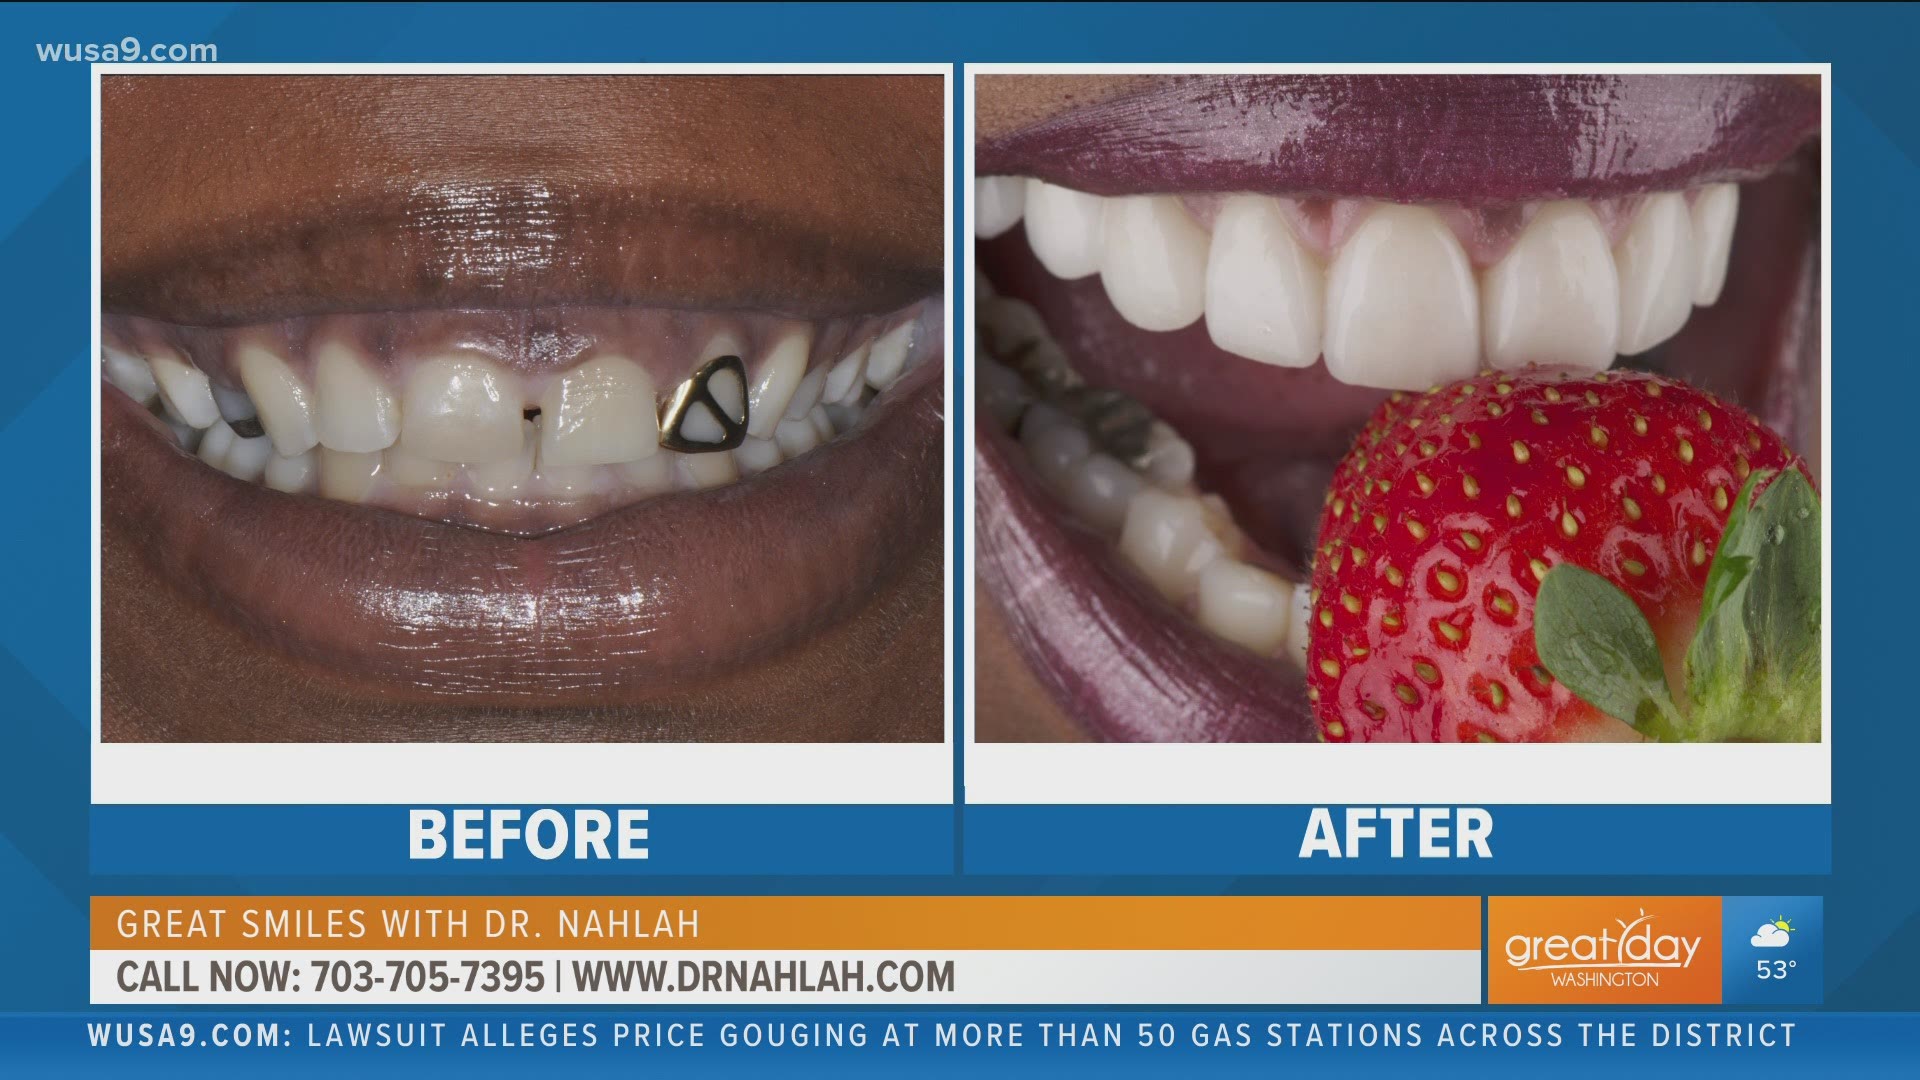 This segment is sponsored by Dr. Nahlah. See how you can get a great smile by Dr. Nahlah. Call 703-705-7295 or go to www.DrNahlah.com.